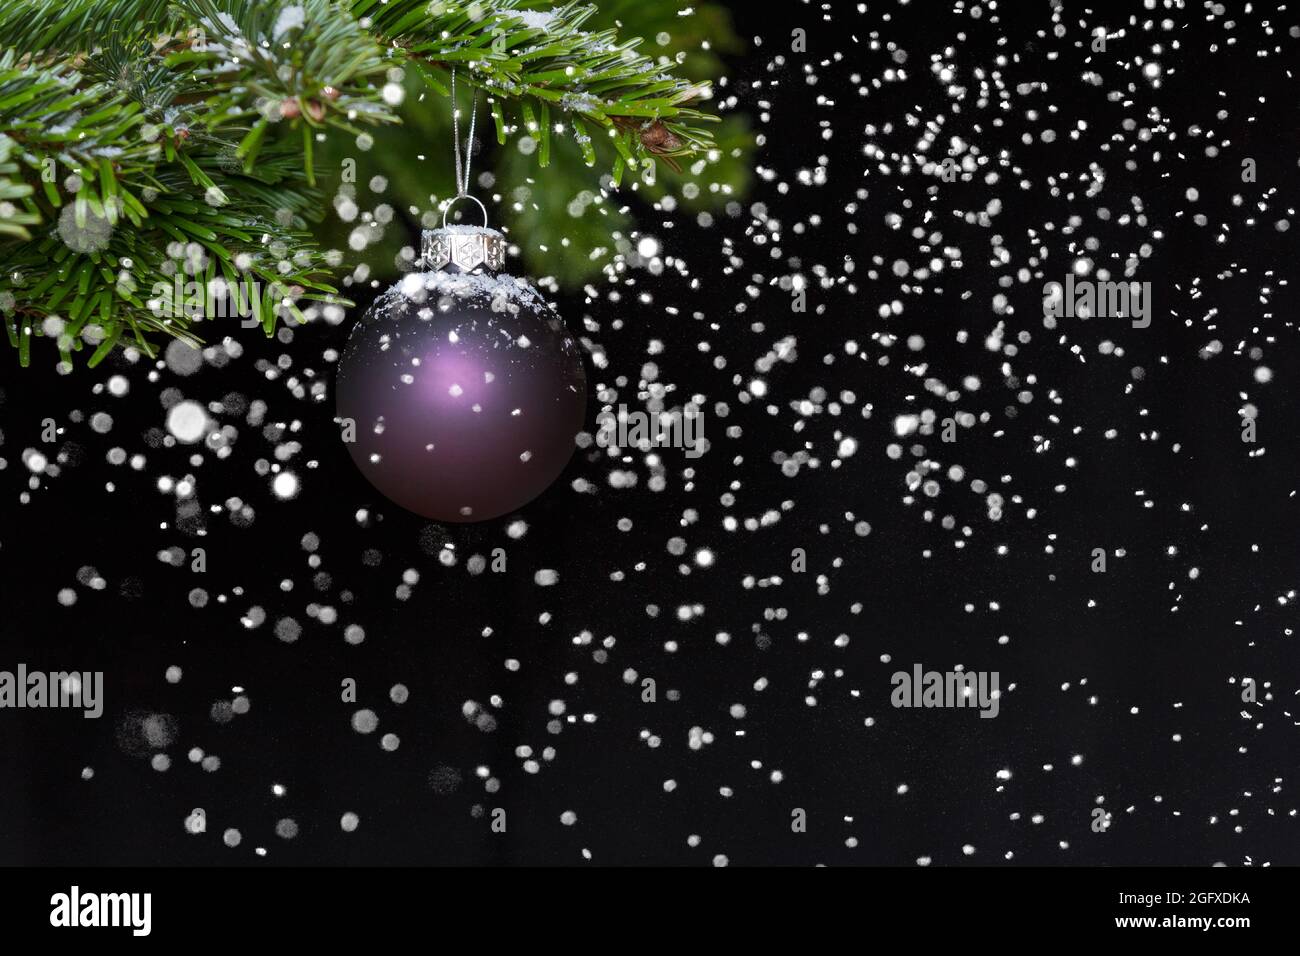 Purple christmas ball hanging on a fir branch while it is snowing, dark background, copy or text space. Stock Photo